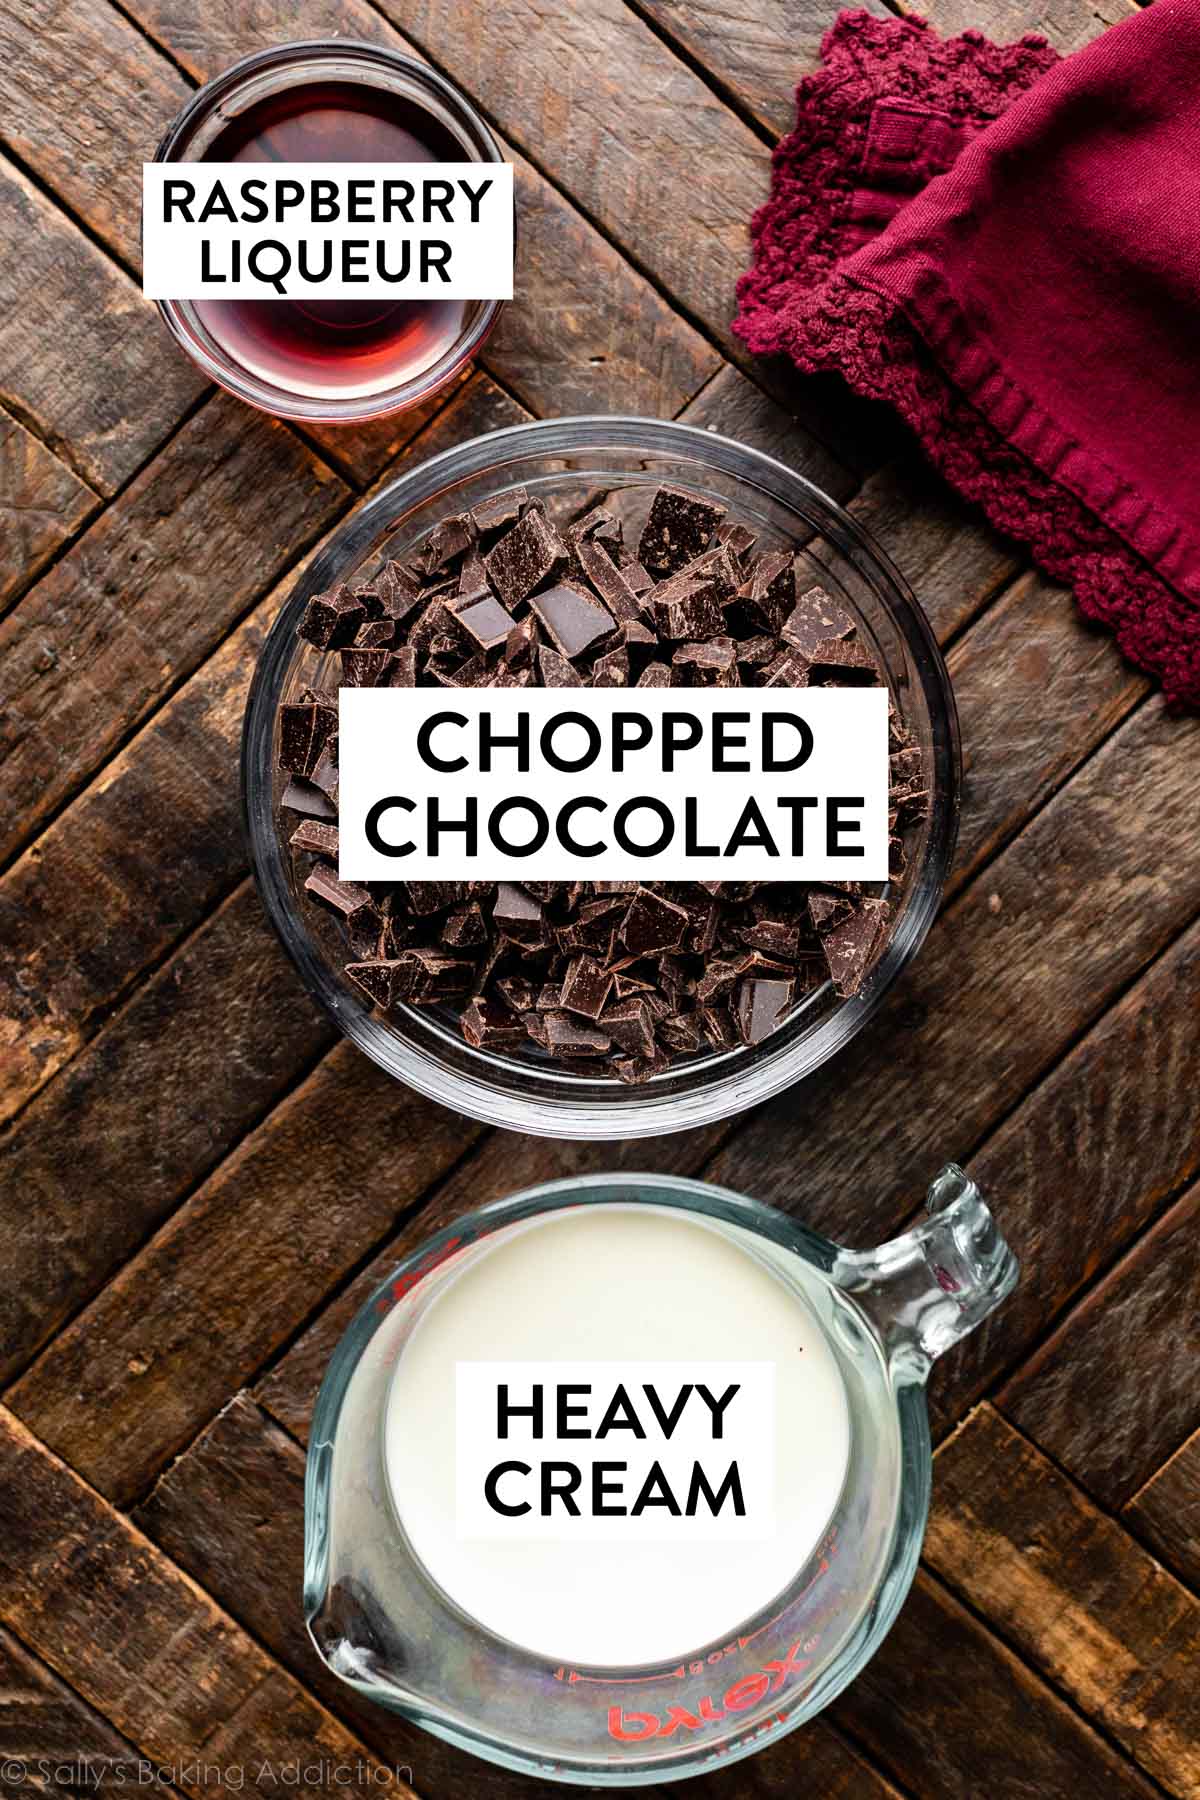 chopped chocolate, heavy cream, and raspberry liqueur in separate bowls on wooden surface.